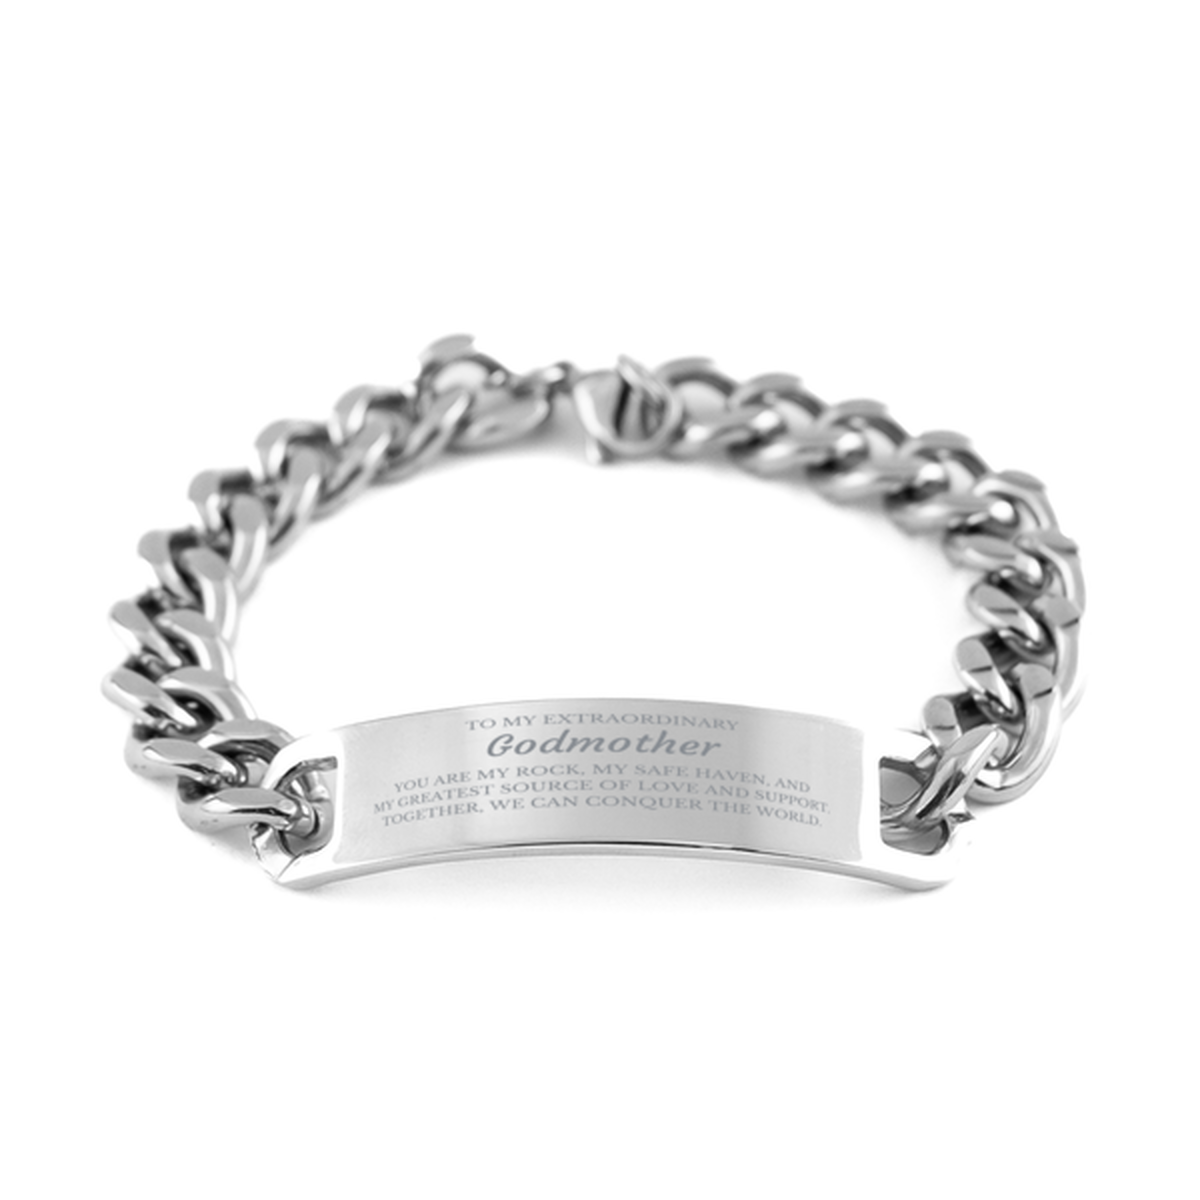 To My Extraordinary Godmother Gifts, Together, we can conquer the world, Birthday Cuban Chain Stainless Steel Bracelet For Godmother, Christmas Gifts For Godmother